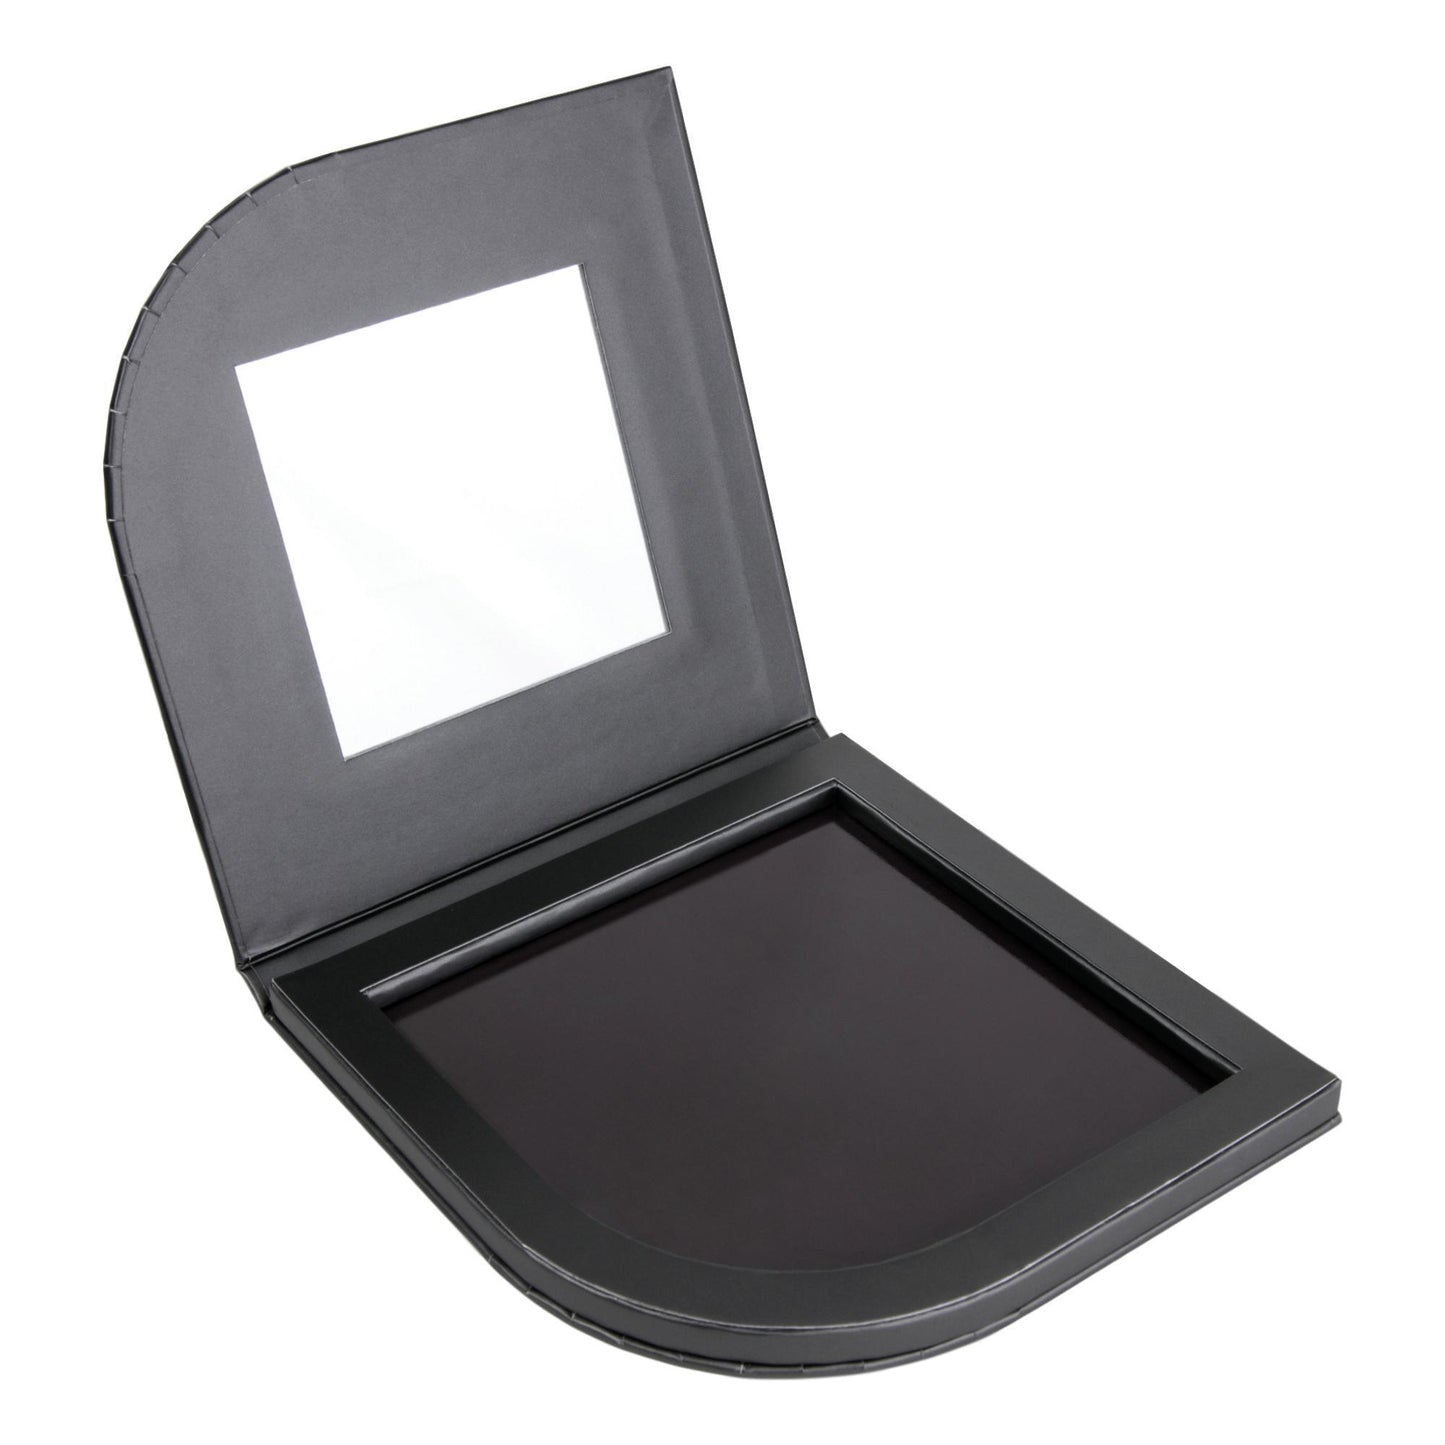 MUD Refillable Compact & Empty Palette, Universal